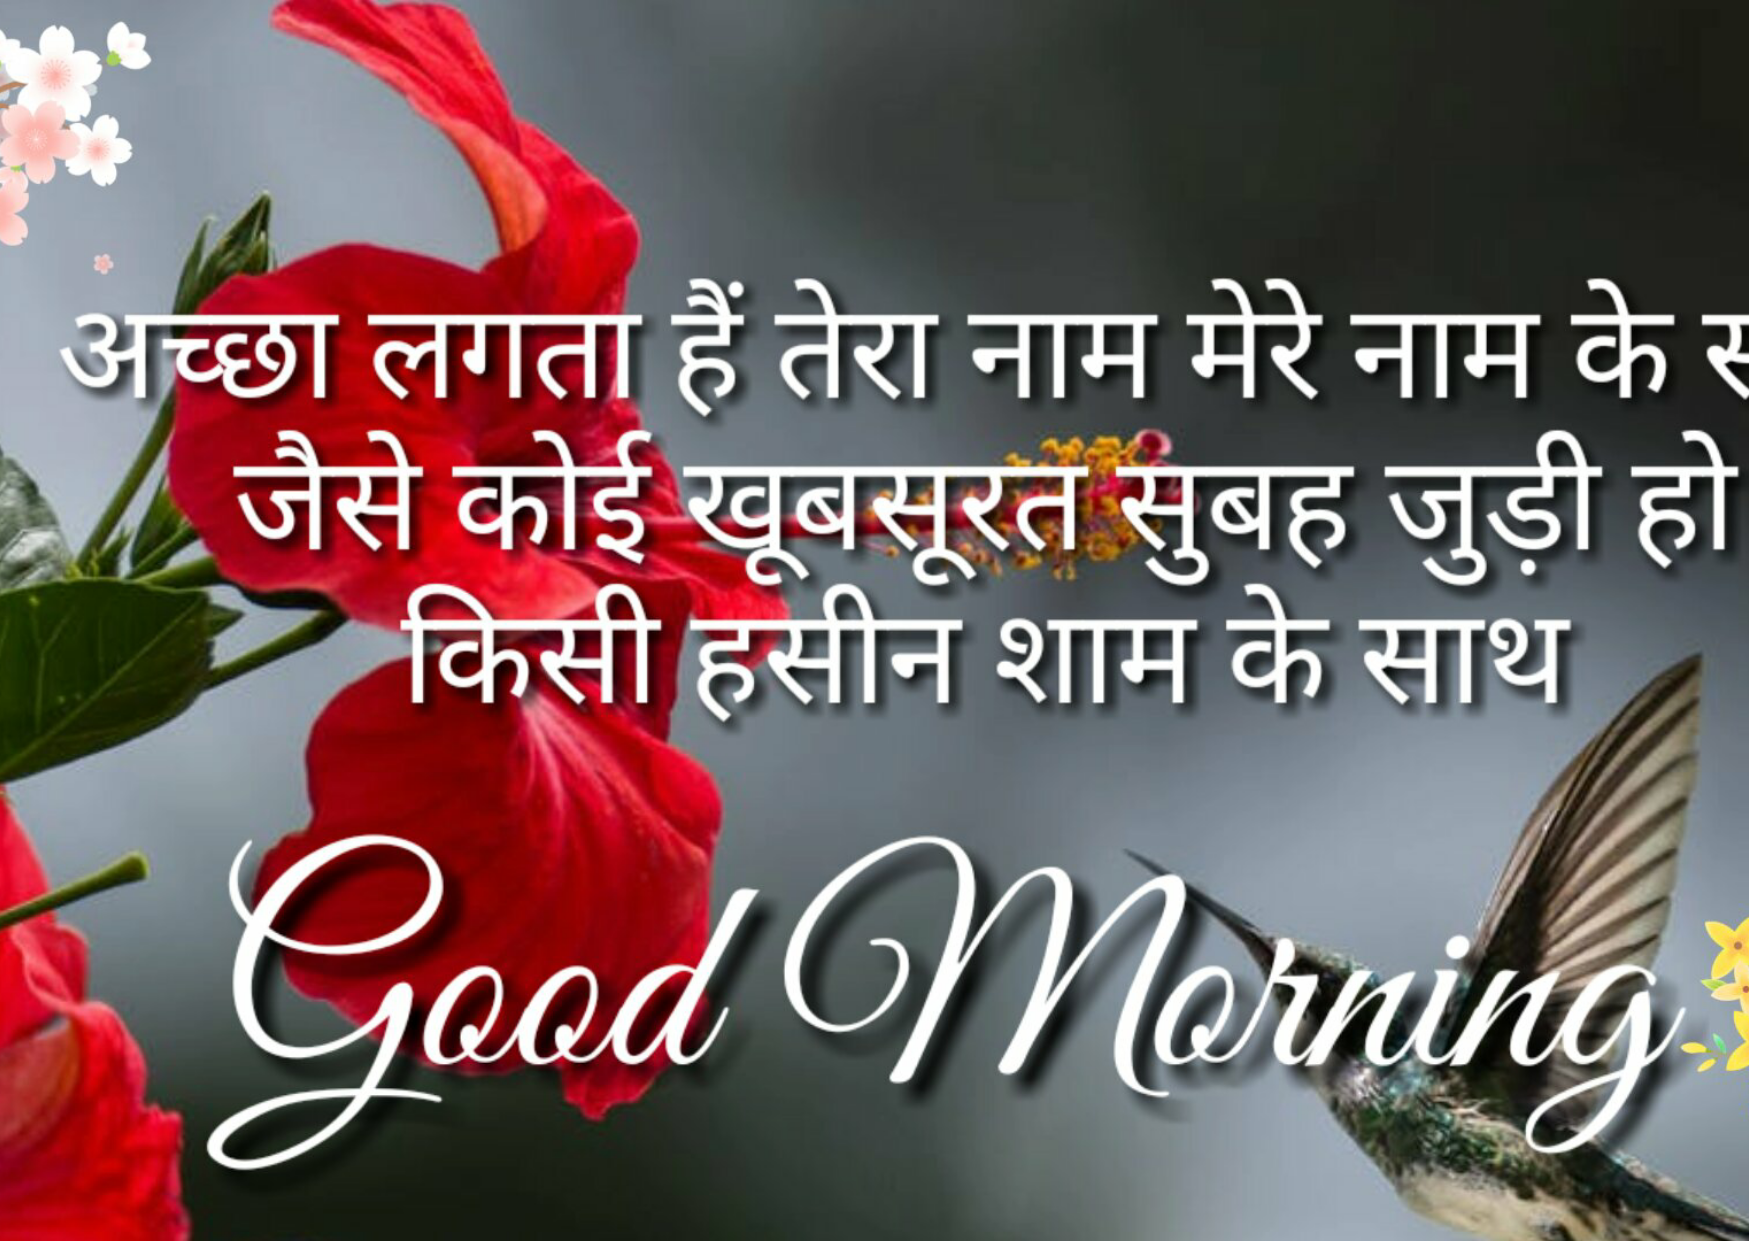 Good Morning Images for Wife Hindi, Good Morning Quotes wishes for Wife & lover,